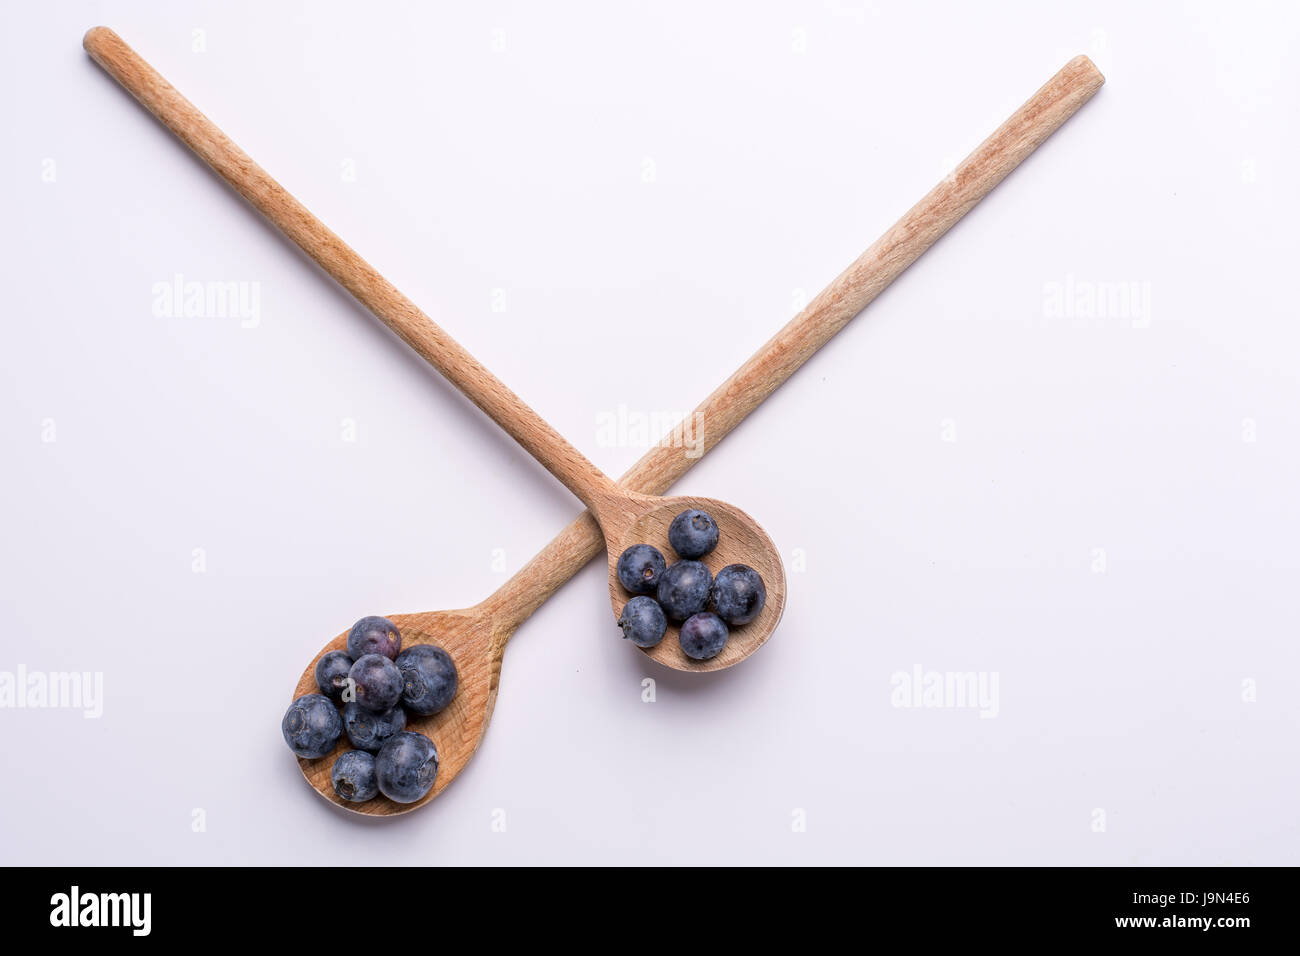 Blueberries on wooden spoon on white background Stock Photo